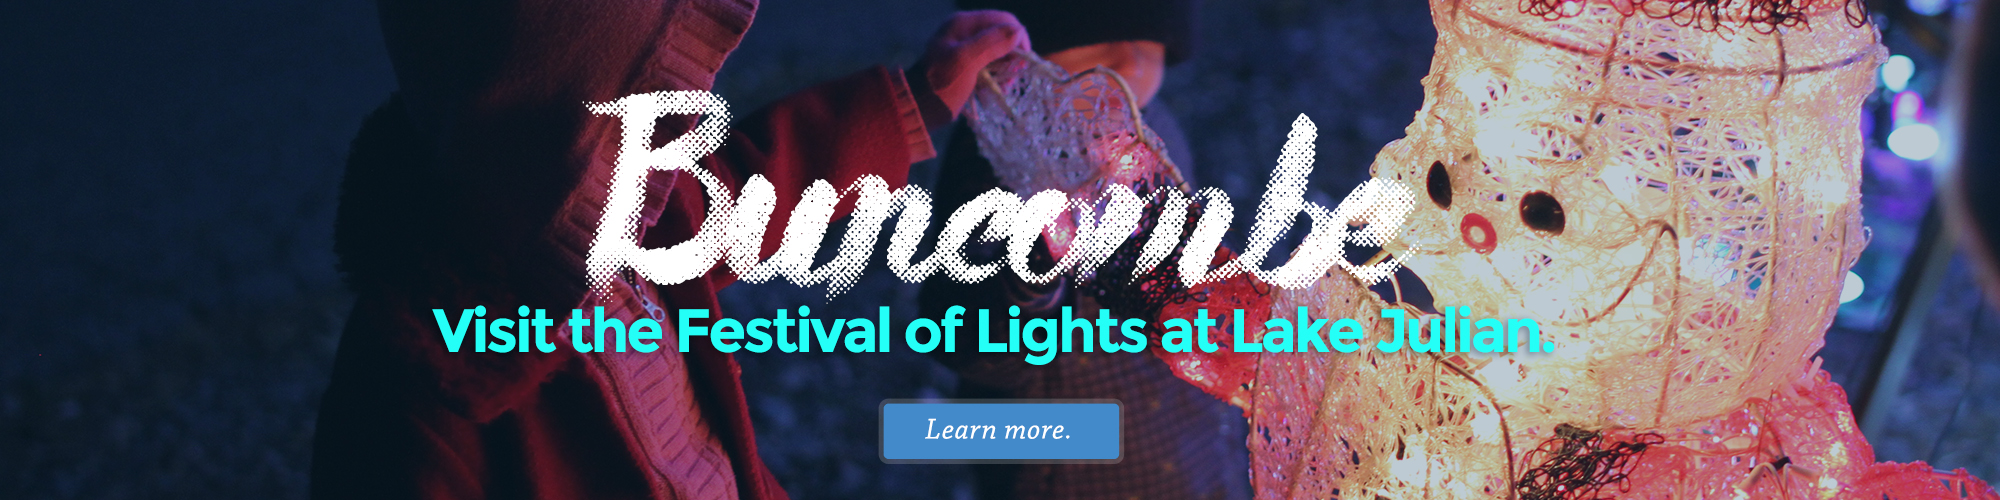 Click for tickets for the Festival of Lights at Lake Julian